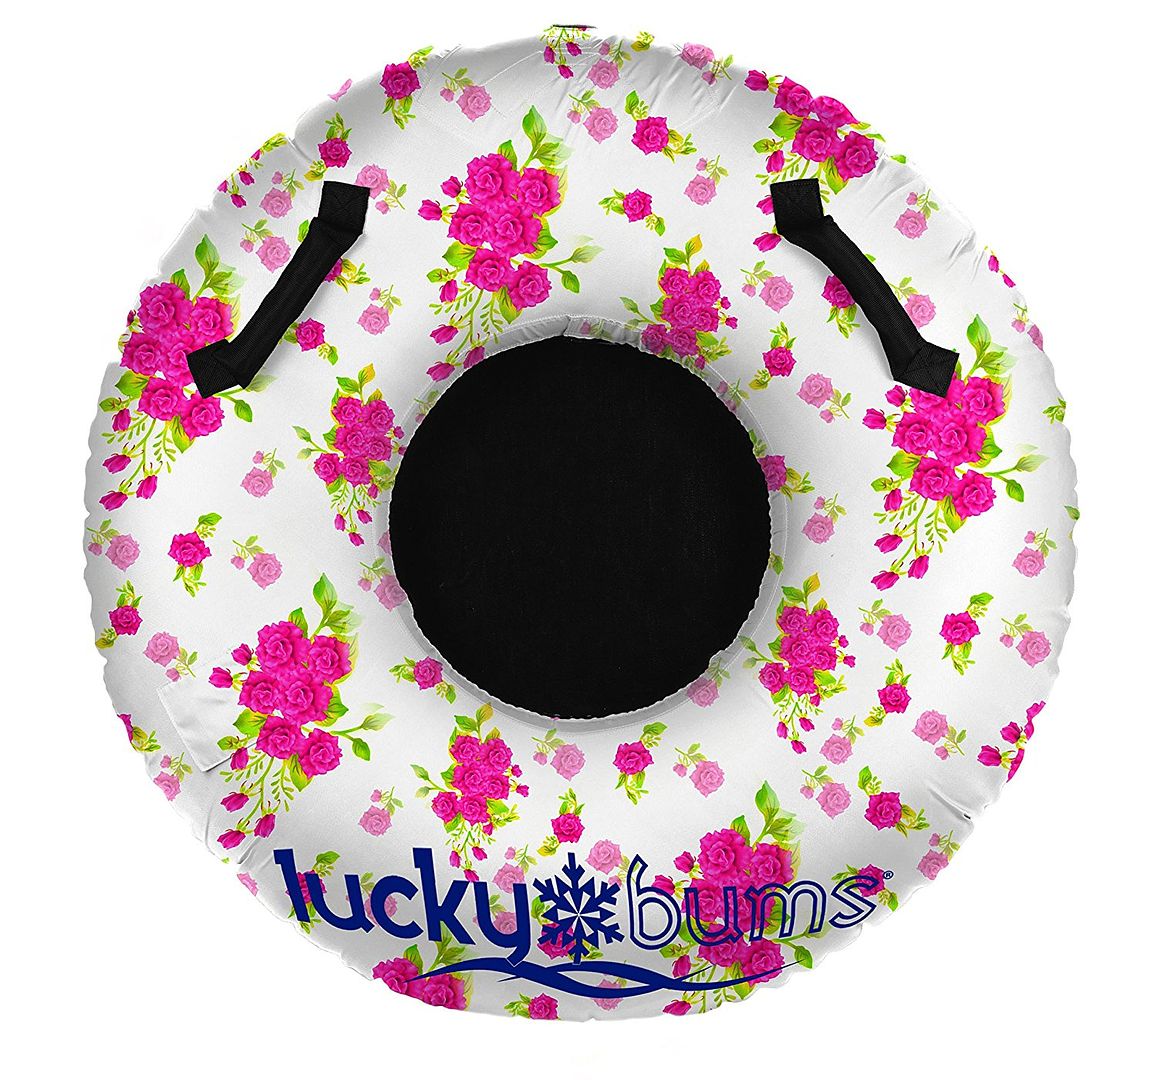 Cool snow tubes for kids: This Lucky Bums Snow Tube is great for kids and adventurous adults.